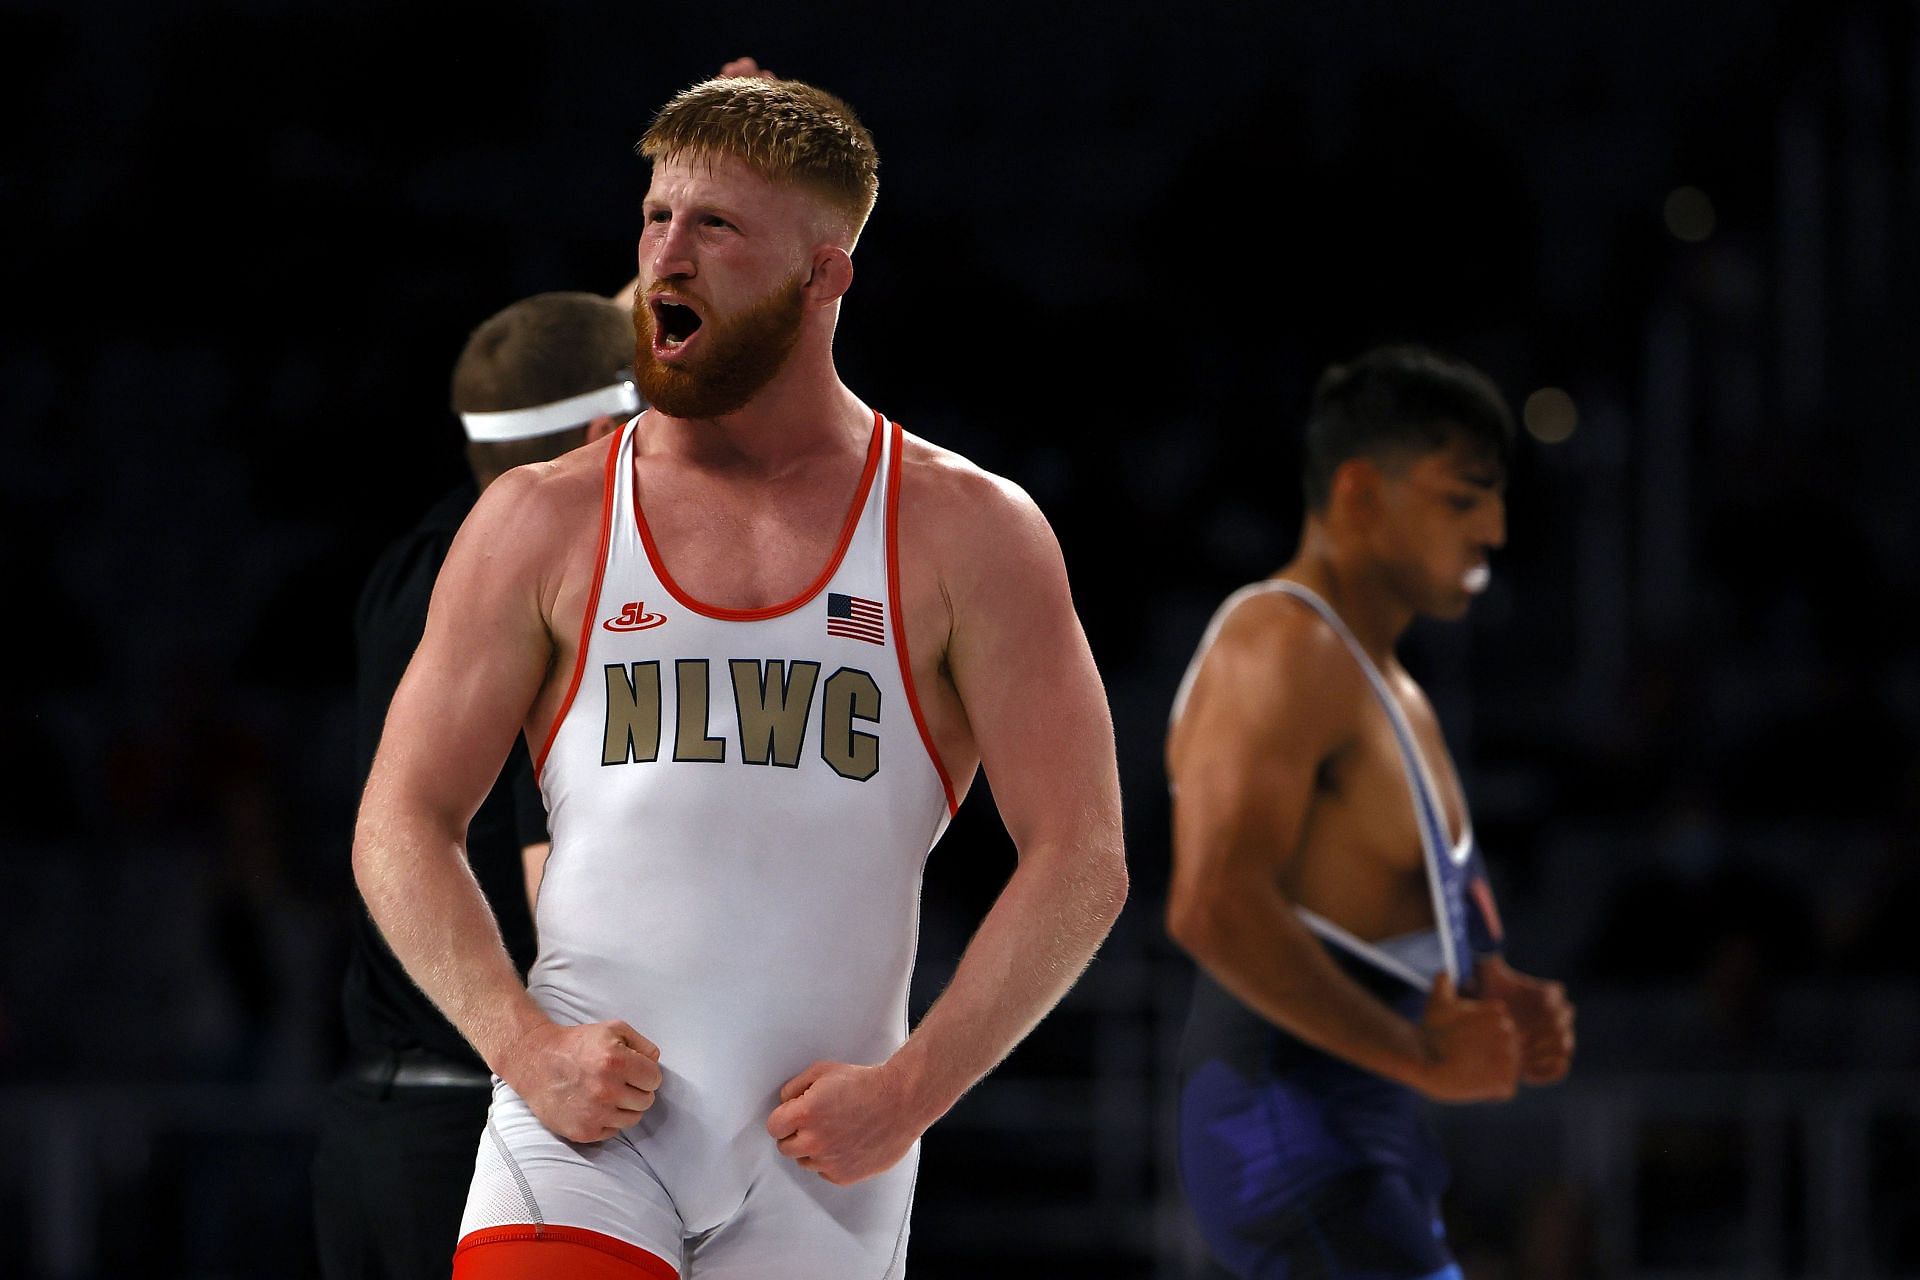 Nickal at the U.S. Olympic Team Trials - Wrestling